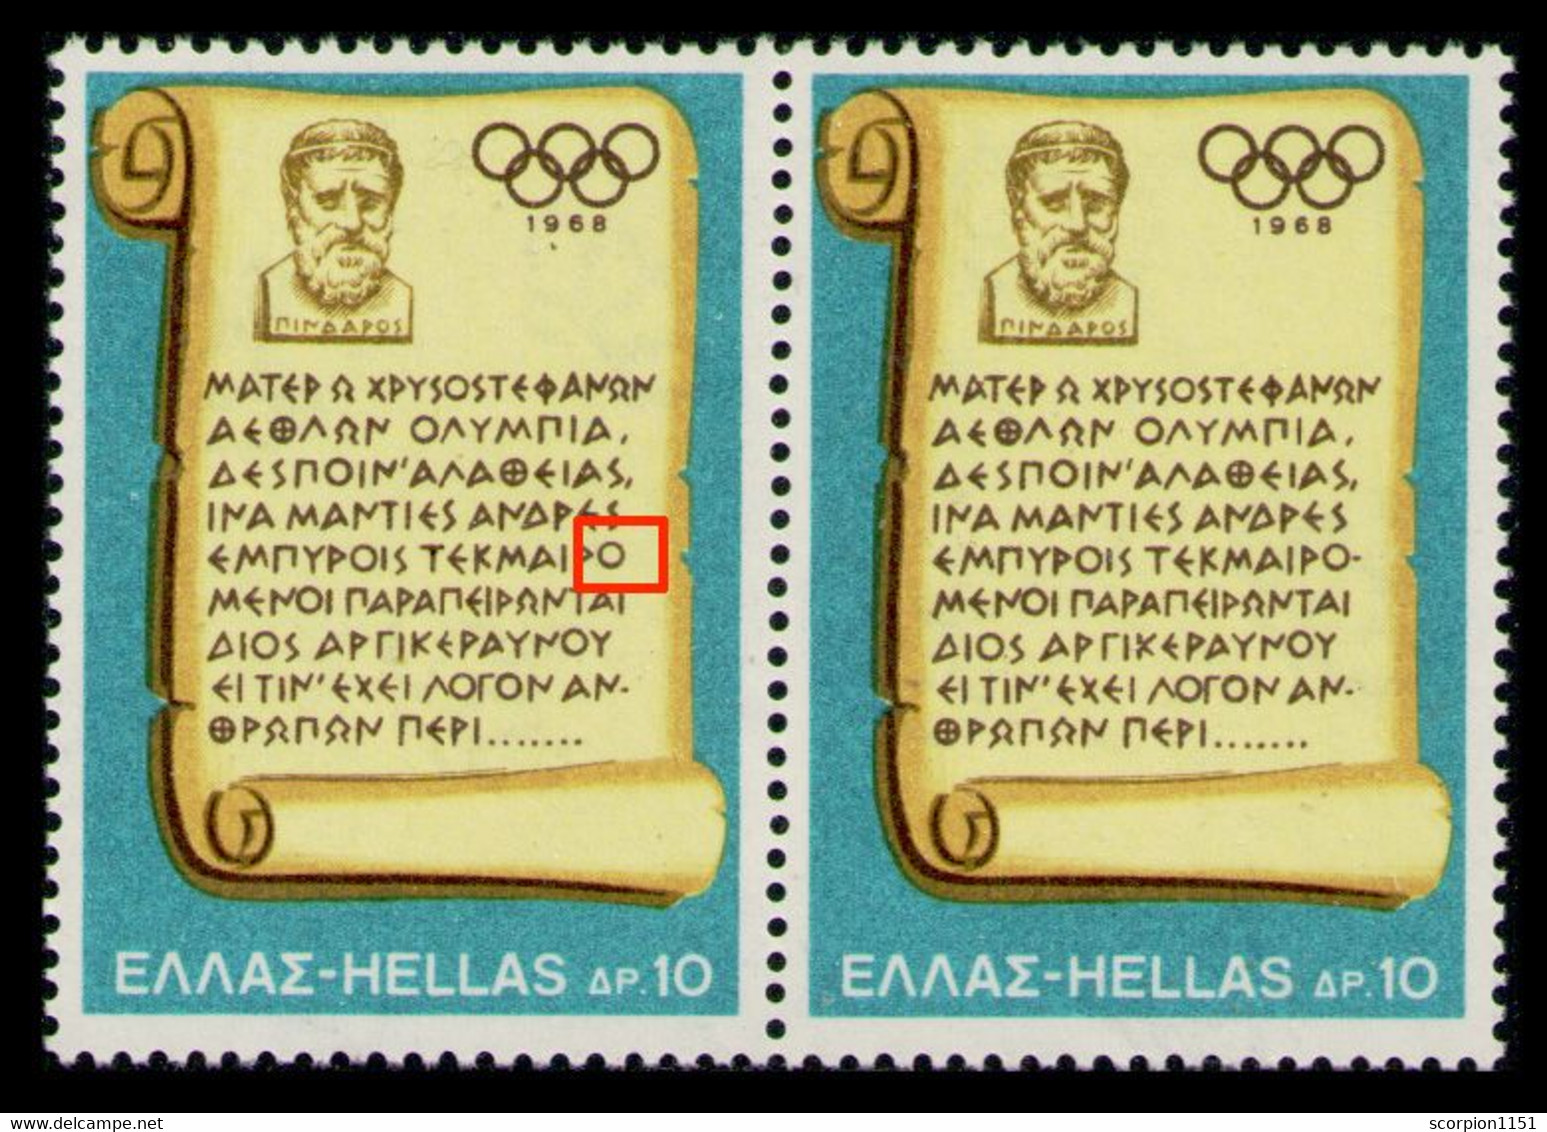 GREECE 1968 - ERROR No Dash After "O" At The Left Stamp RR In Pair - MNH** - Neufs